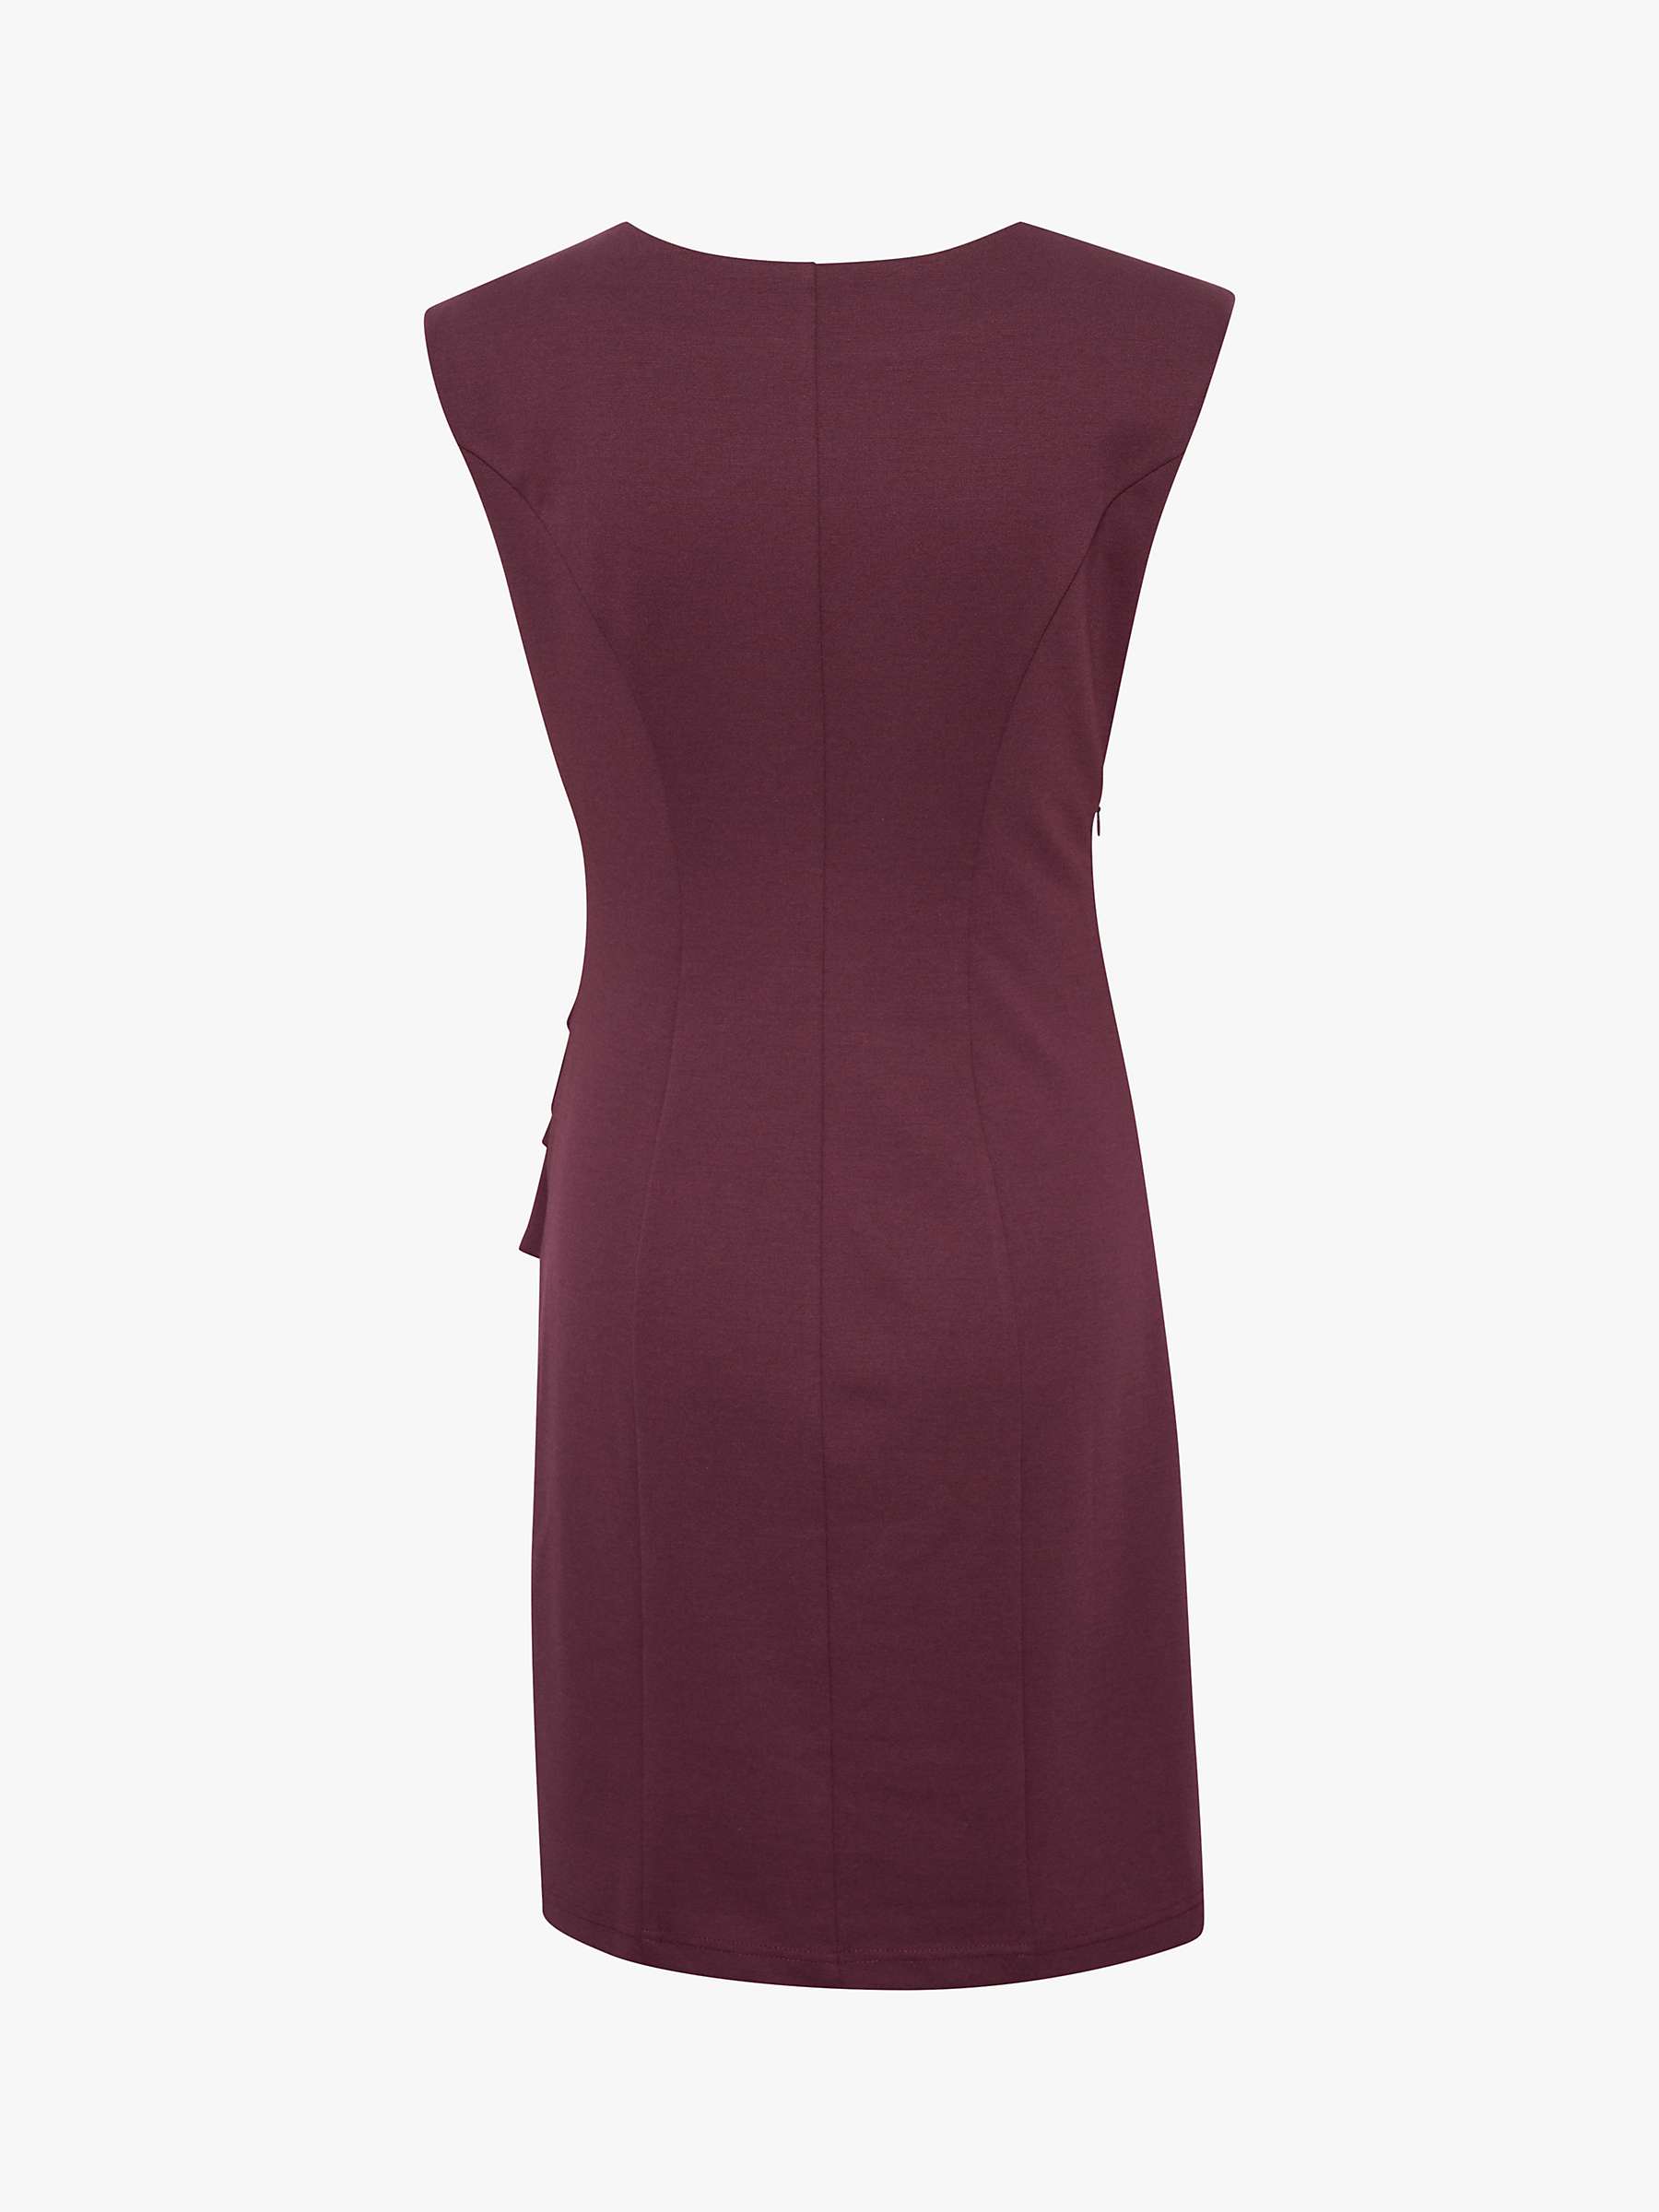 Buy KAFFE India Sleeveless Ruched Fitted Dress Online at johnlewis.com